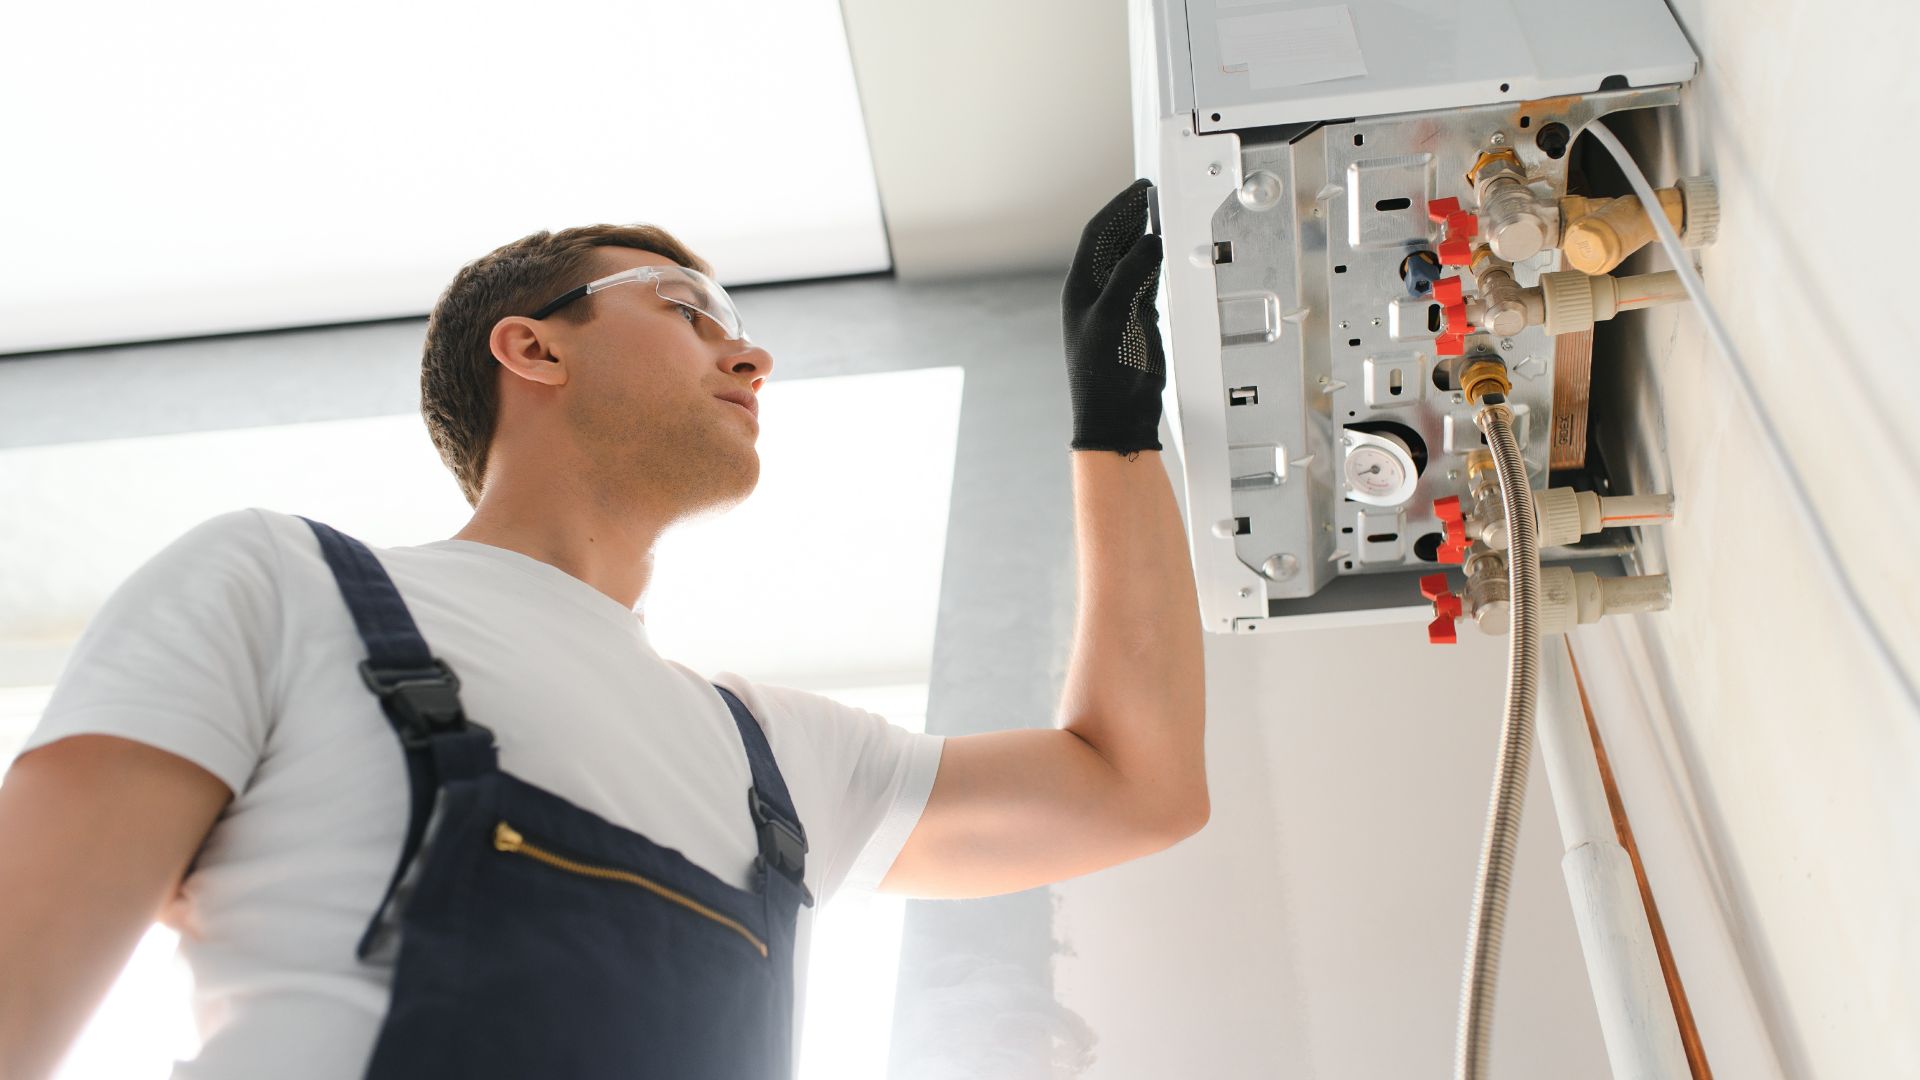 Contact CAN Plumbing and Drainage for all your boiler requirements, handled by our expert plumbers.